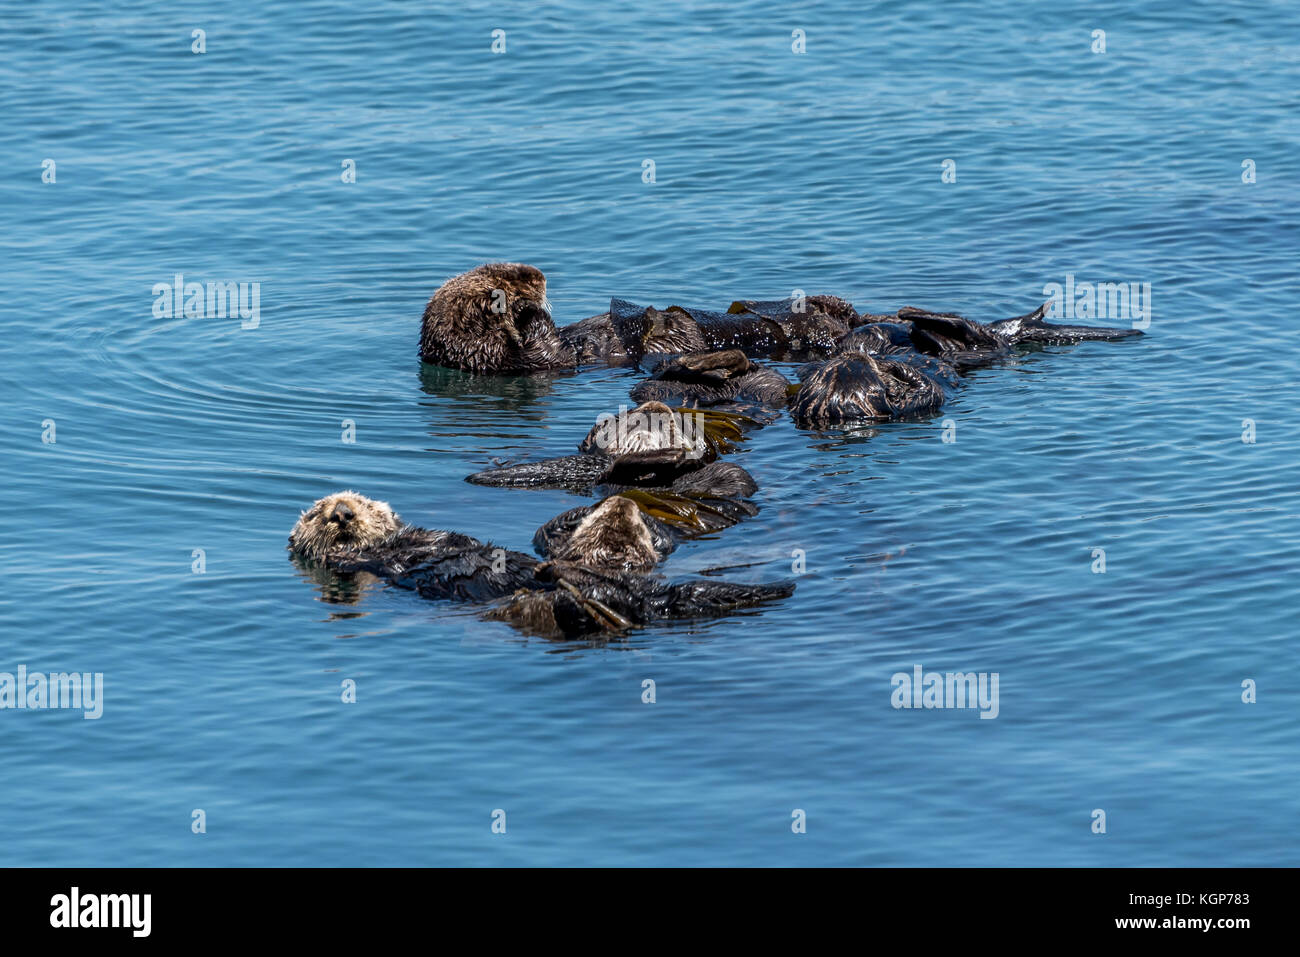 A group of brown California sea otters sleeping or 'rafting' together where they sleep connected to each other in the water at Morro Bay, California. Stock Photo